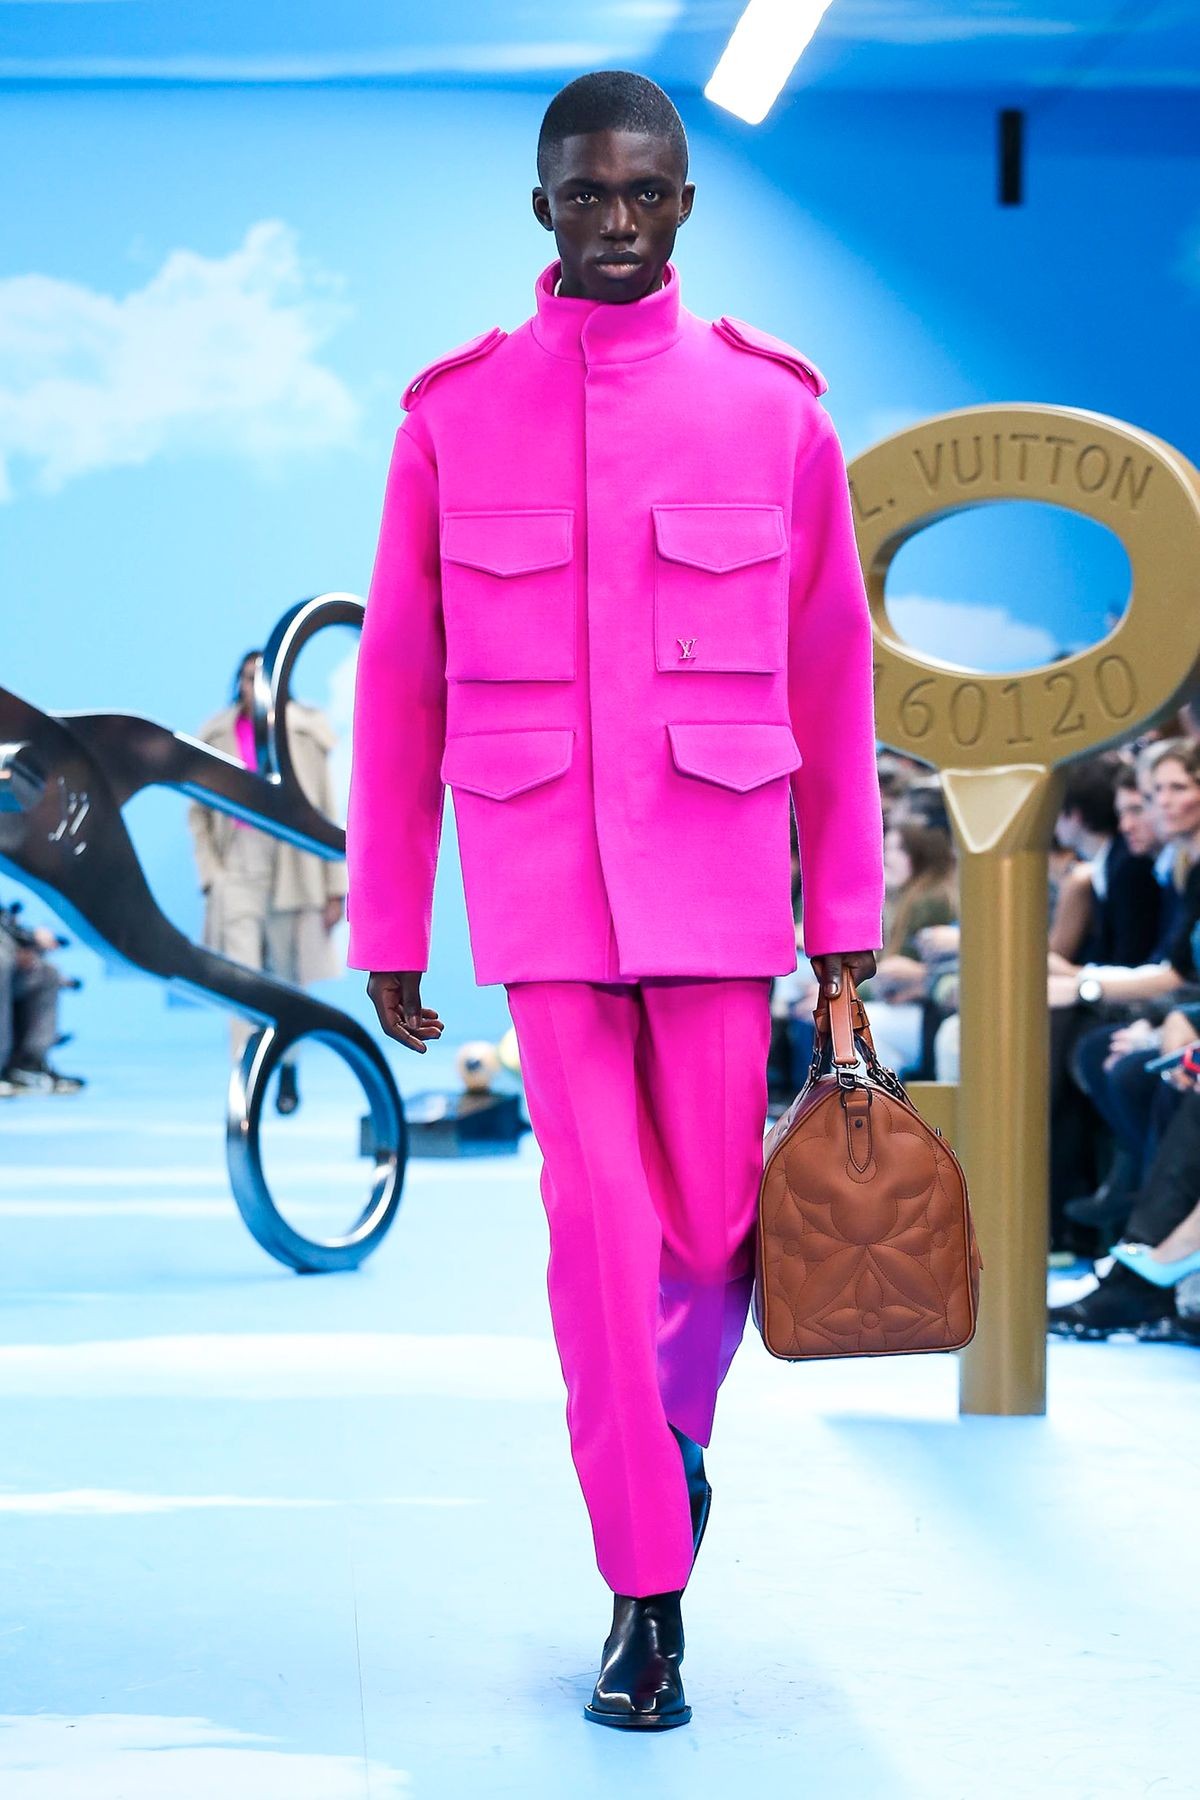 Louis Vuitton - inverno 2020 masculino (Foto: Getty Images)